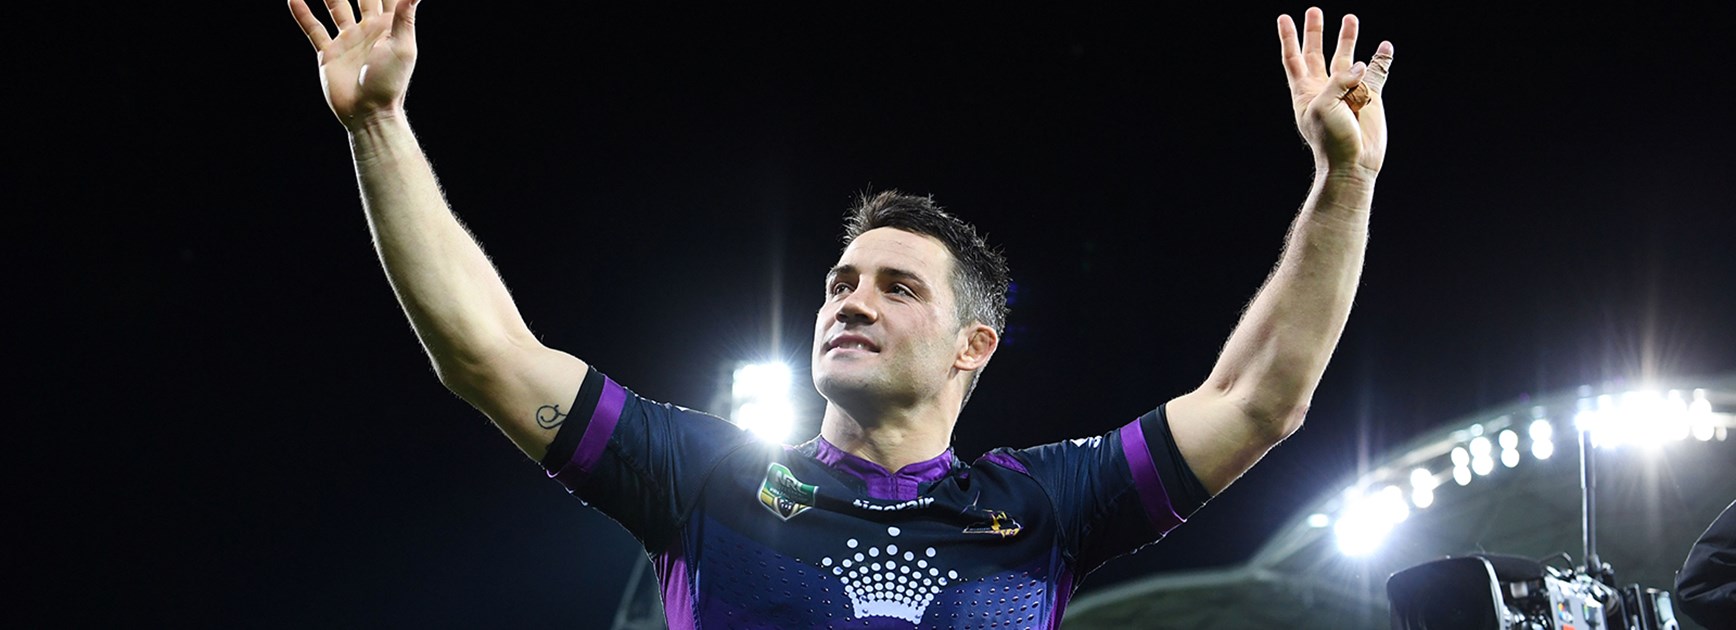 Cooper Cronk after his last game as a Storm player at AAMI Park.